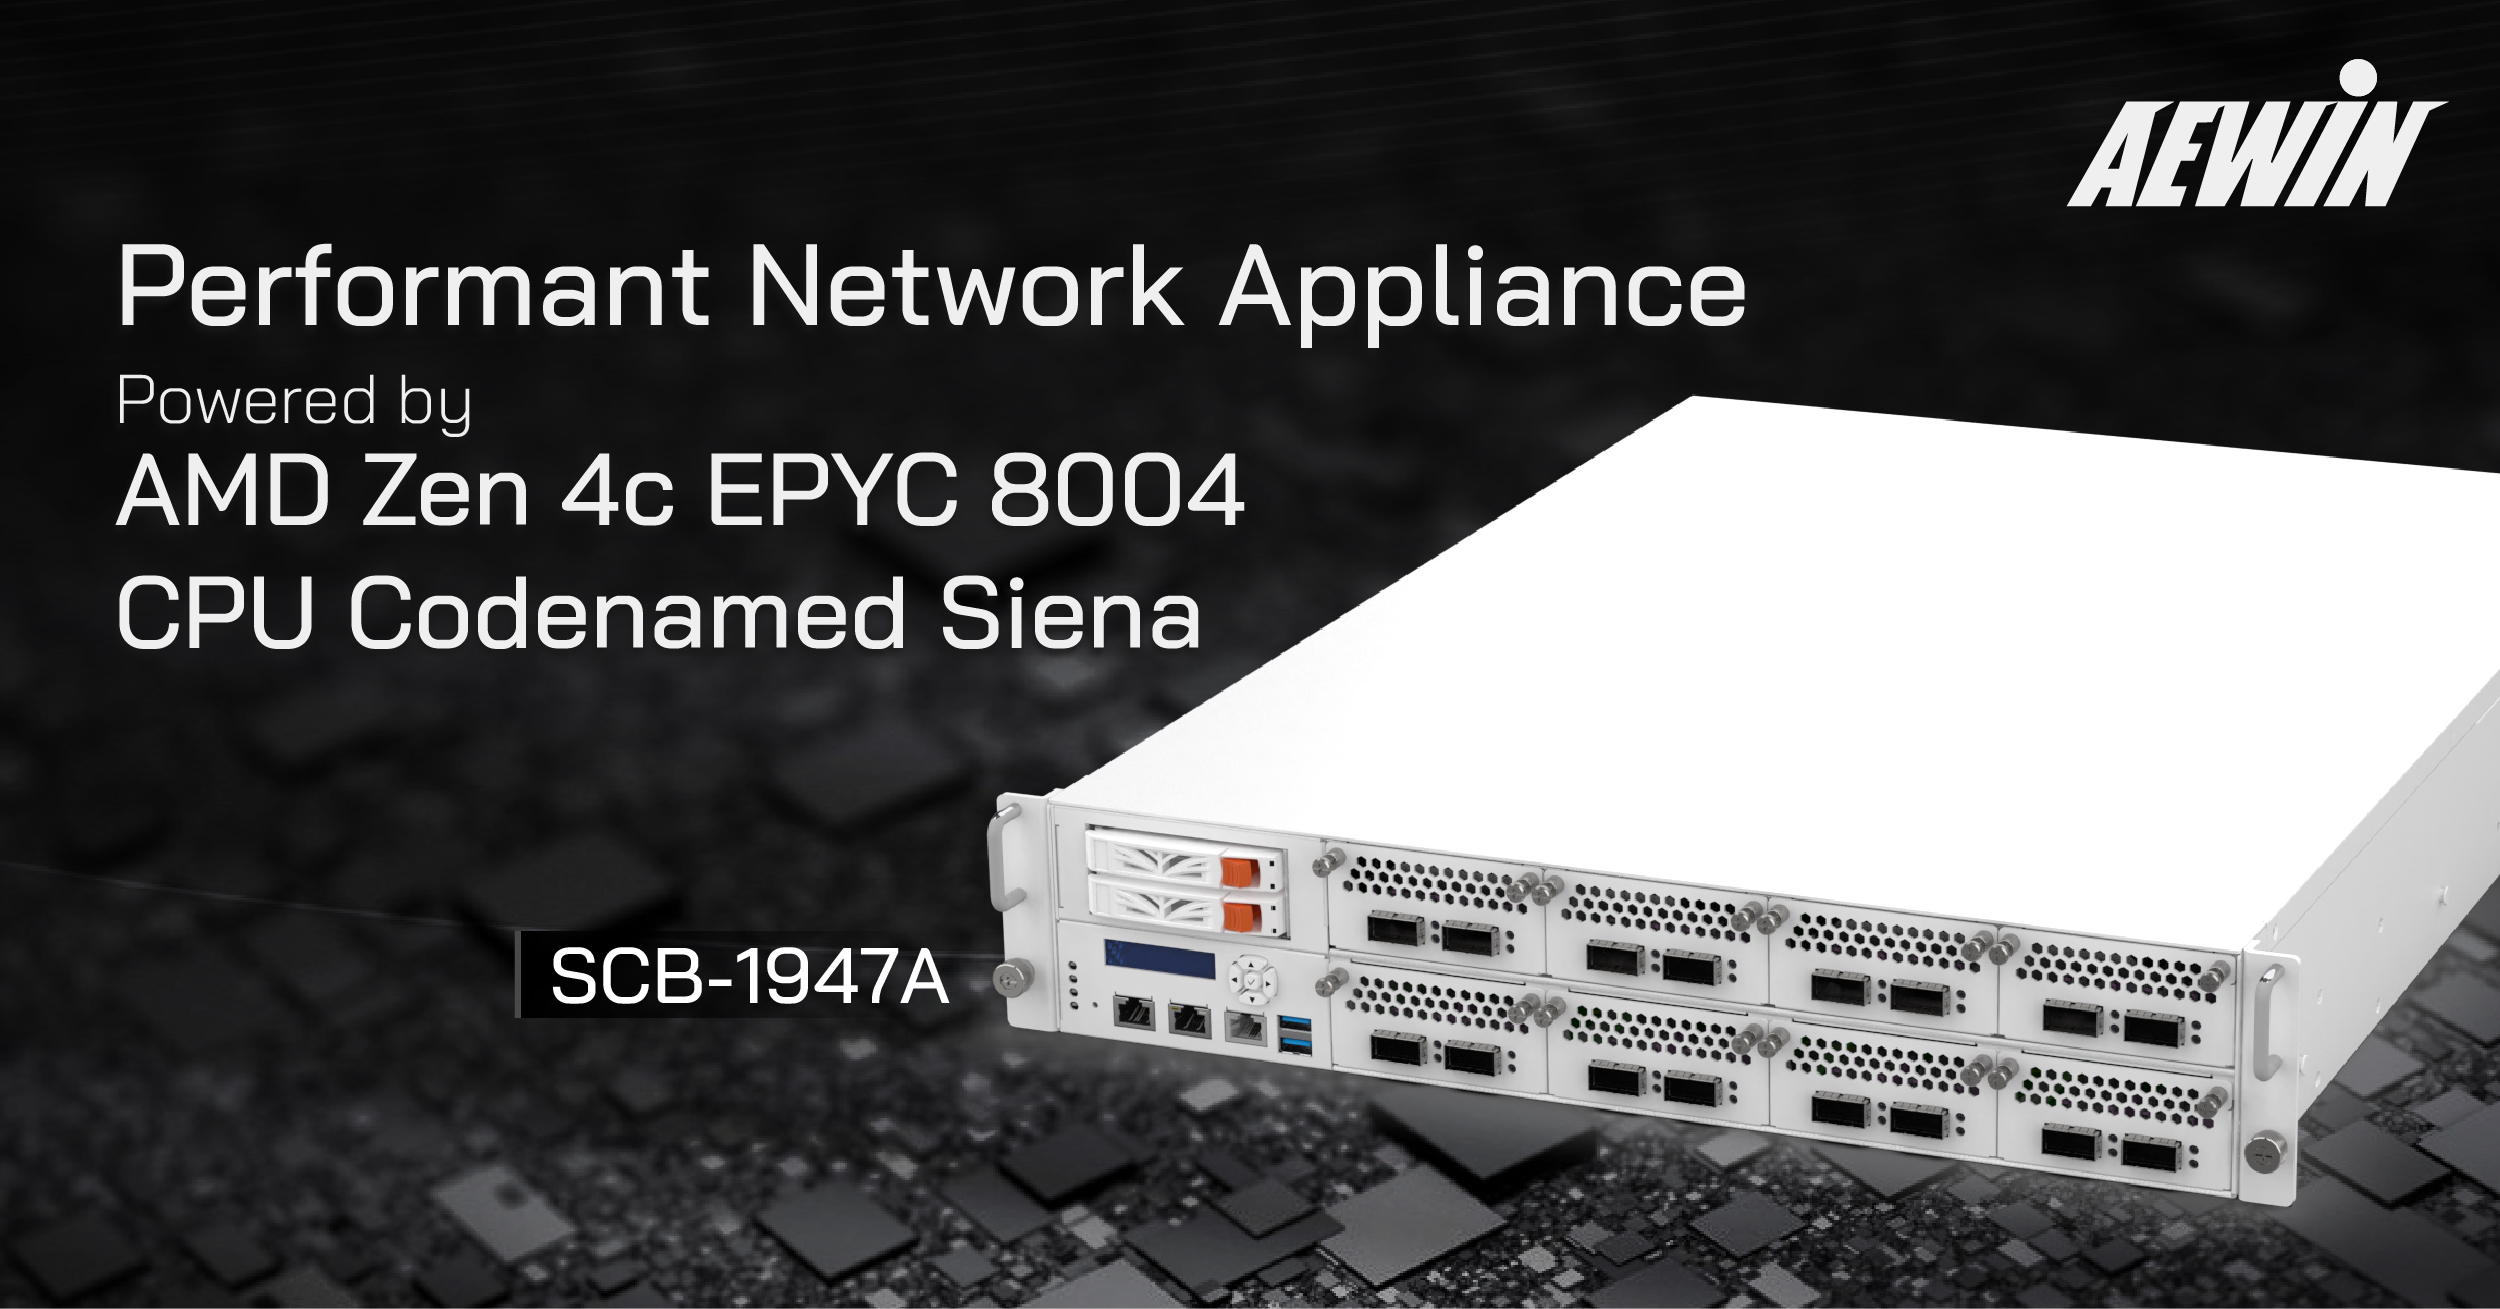 Performant Network Appliance, SCB-1947A, Powered by AMD Zen 4c EPYC 8004 CPU Codenamed Siena